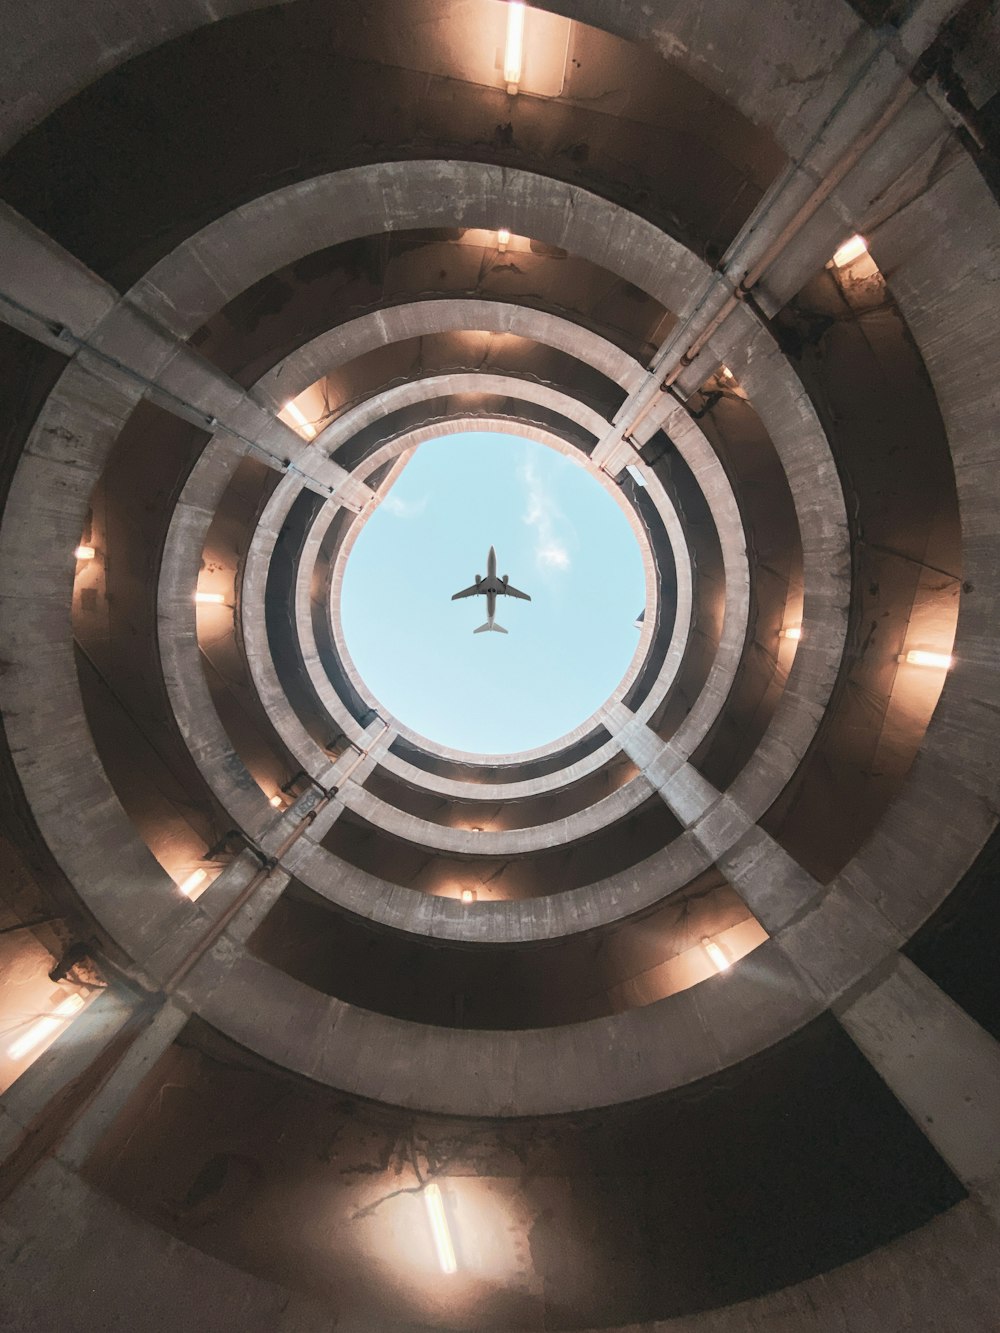 an airplane is flying through a circular structure